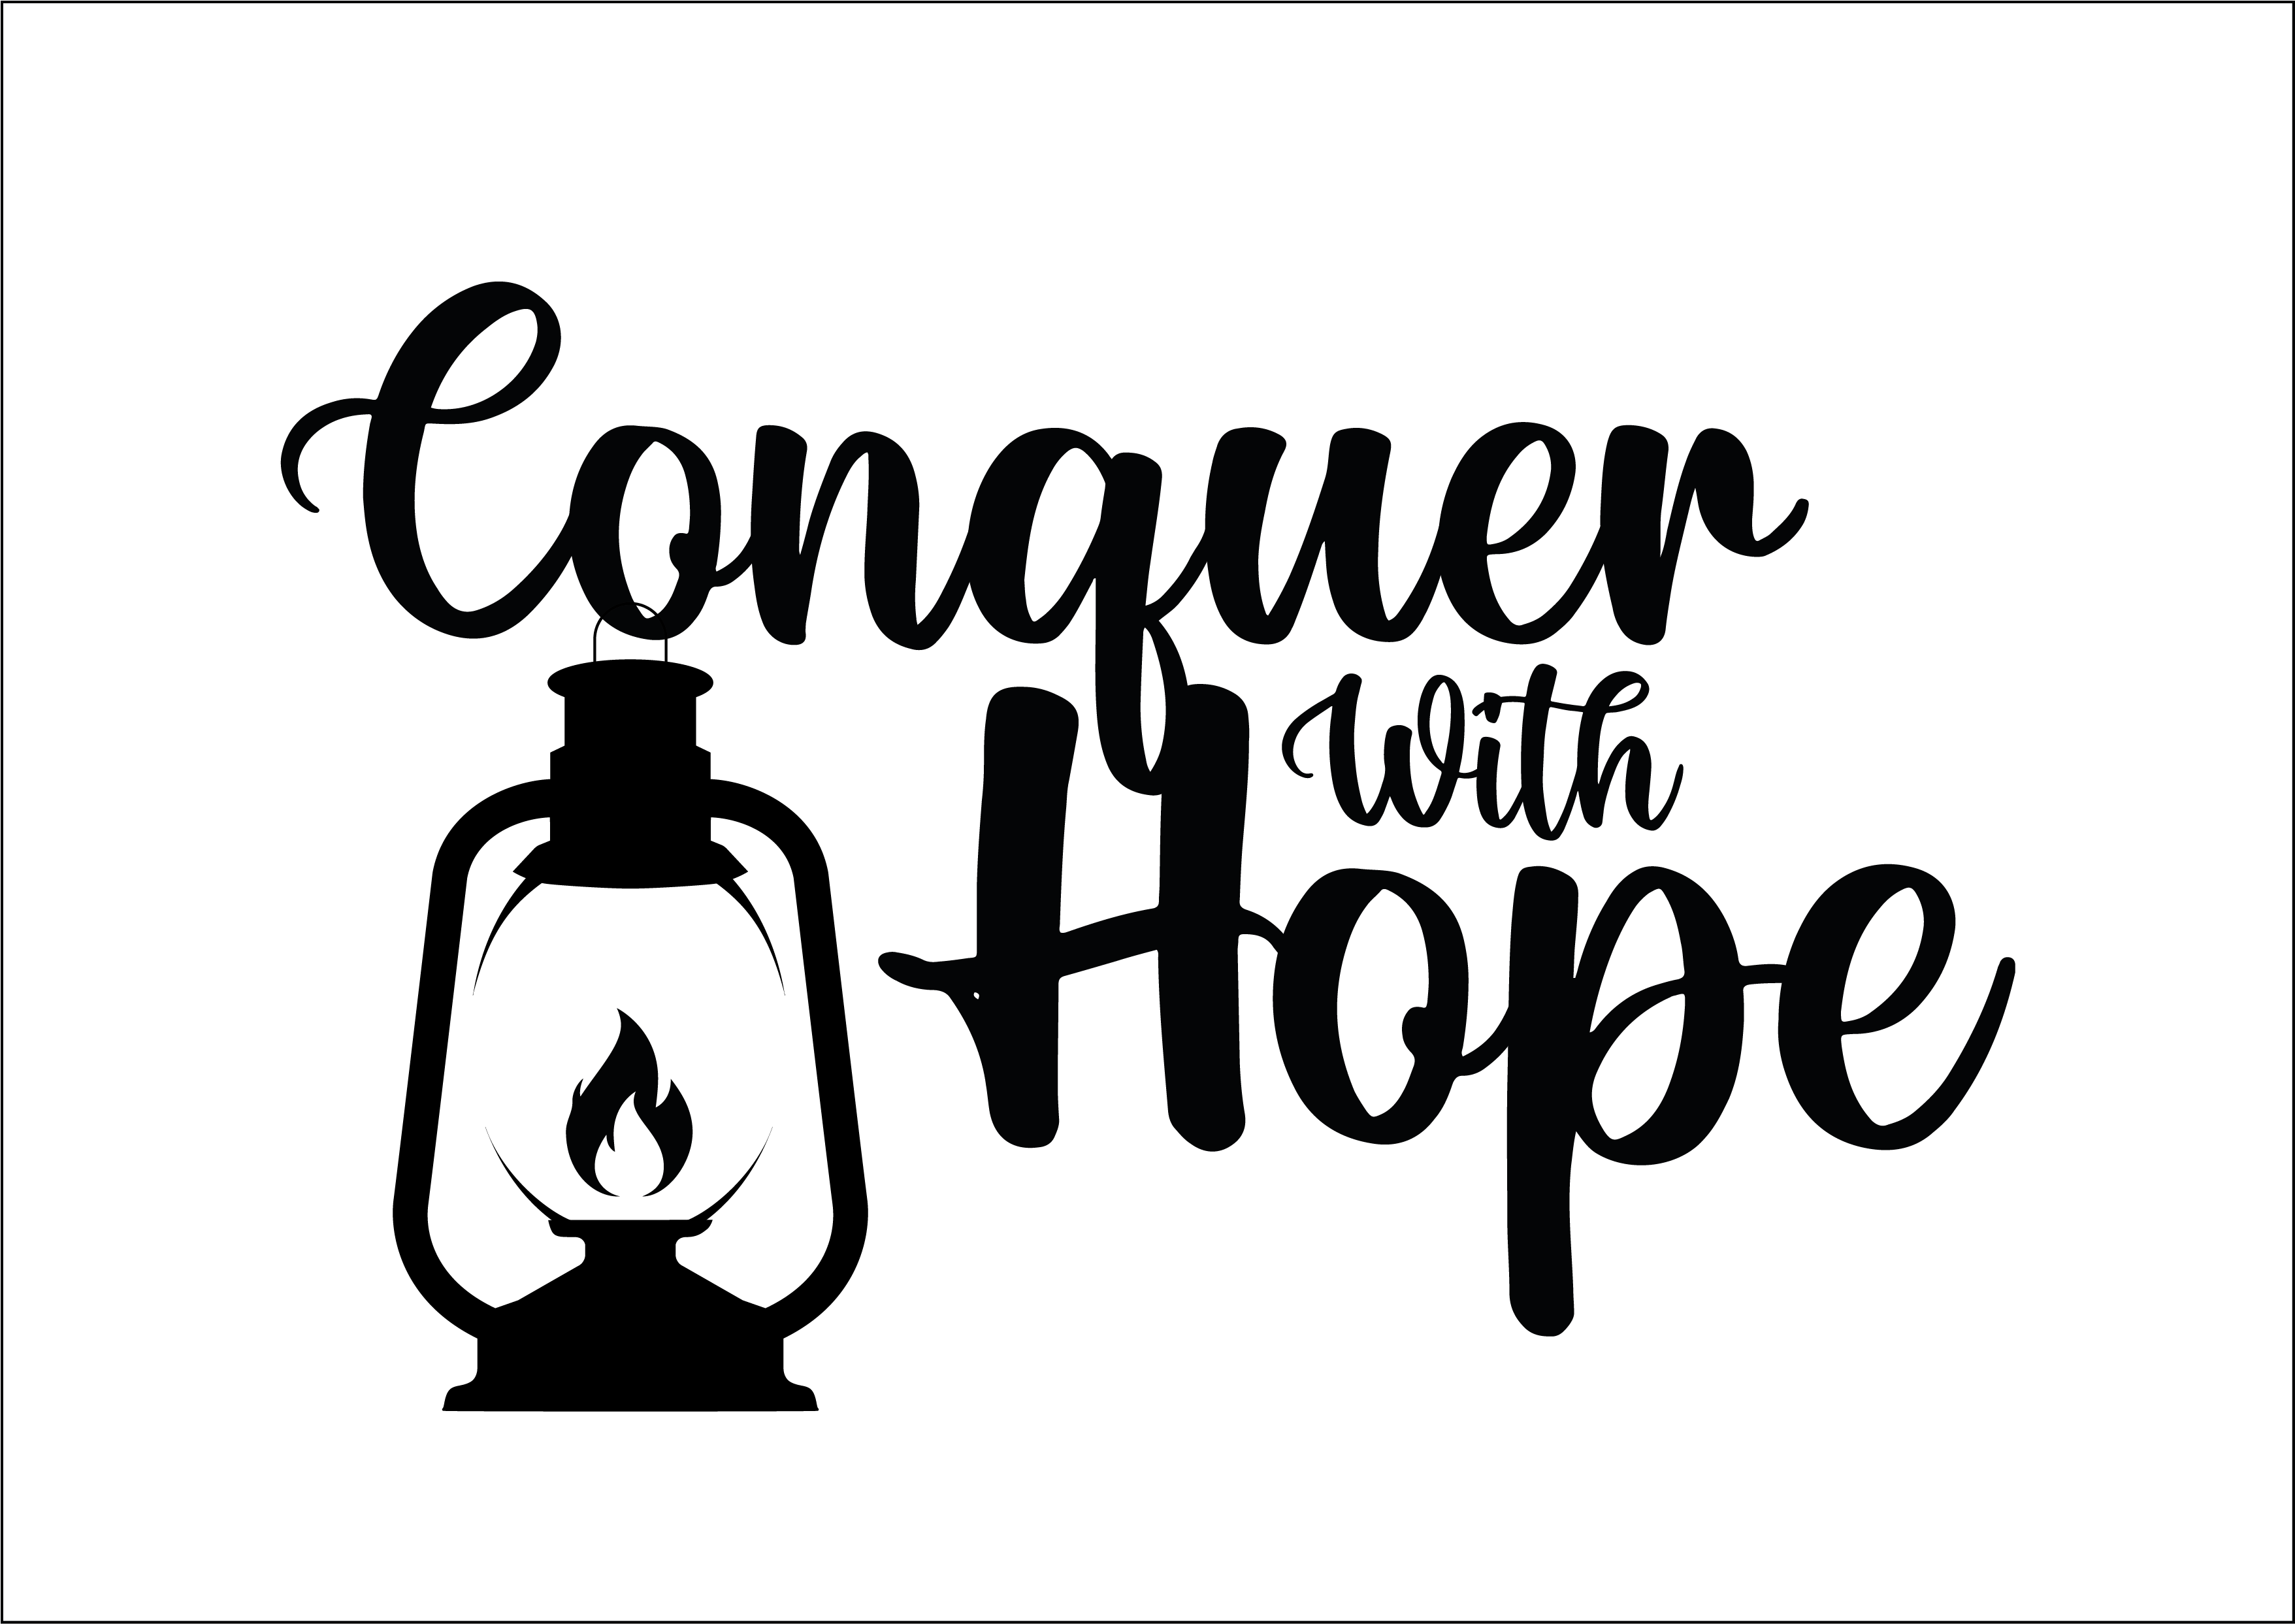 Our New Logo! Conquer With Hope written in cursive font with a small lantern with a little flame. All done black and white